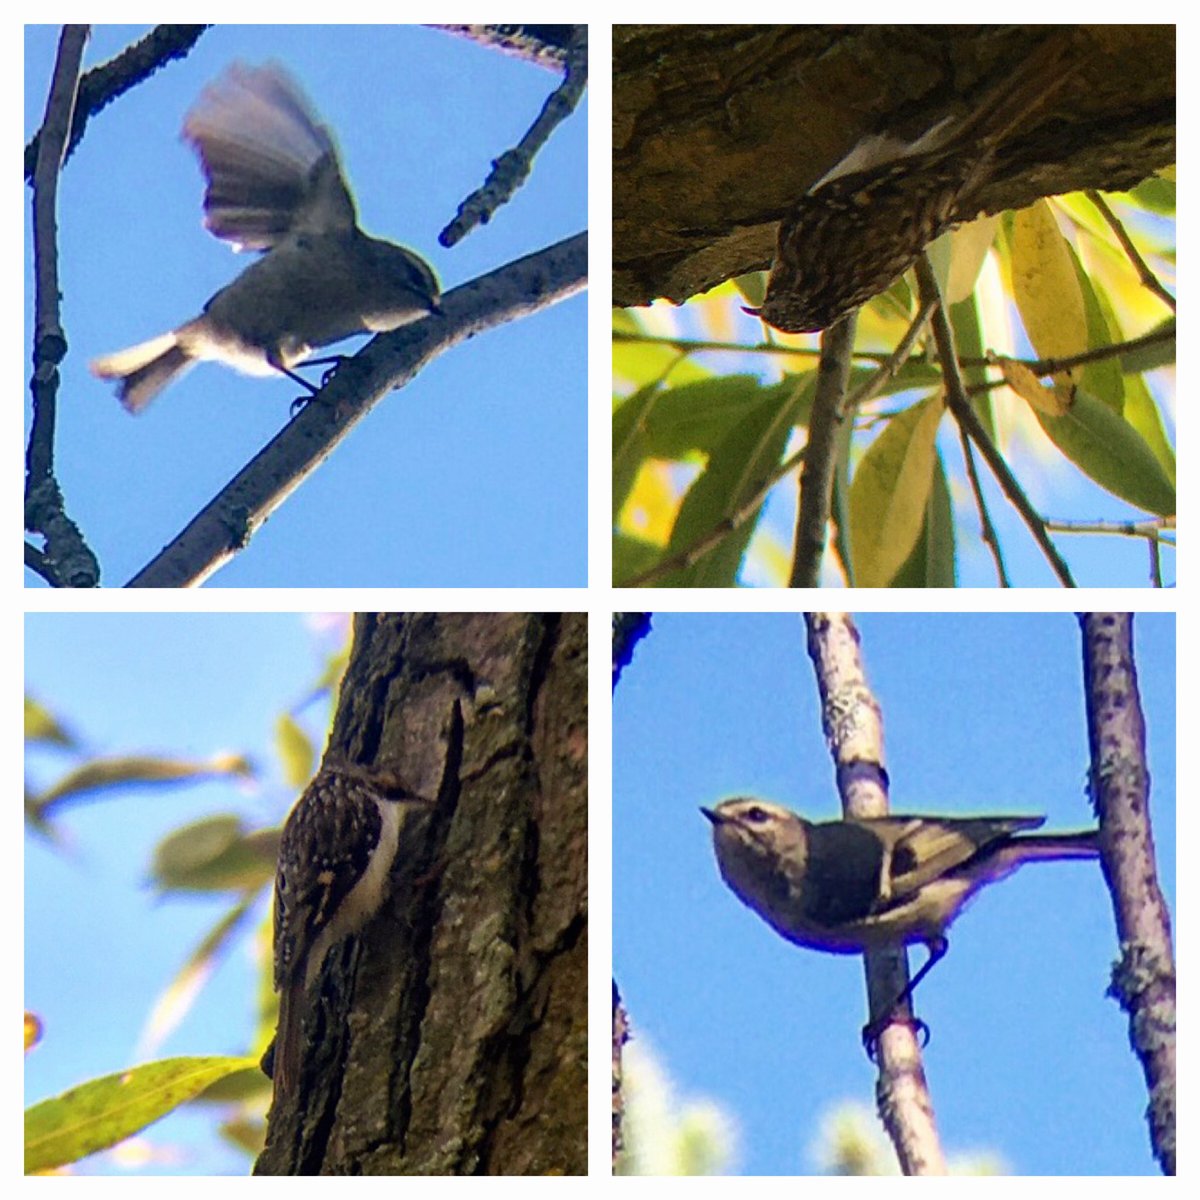 Ontario Place bird notes #21 | From last week, an afternoon full of golden-crowned kinglets, white-crowned sparrows, yellow-rumped warblers, and the clearest photos I’ve managed to take so far of a brown creeper that is normally around the West Island.